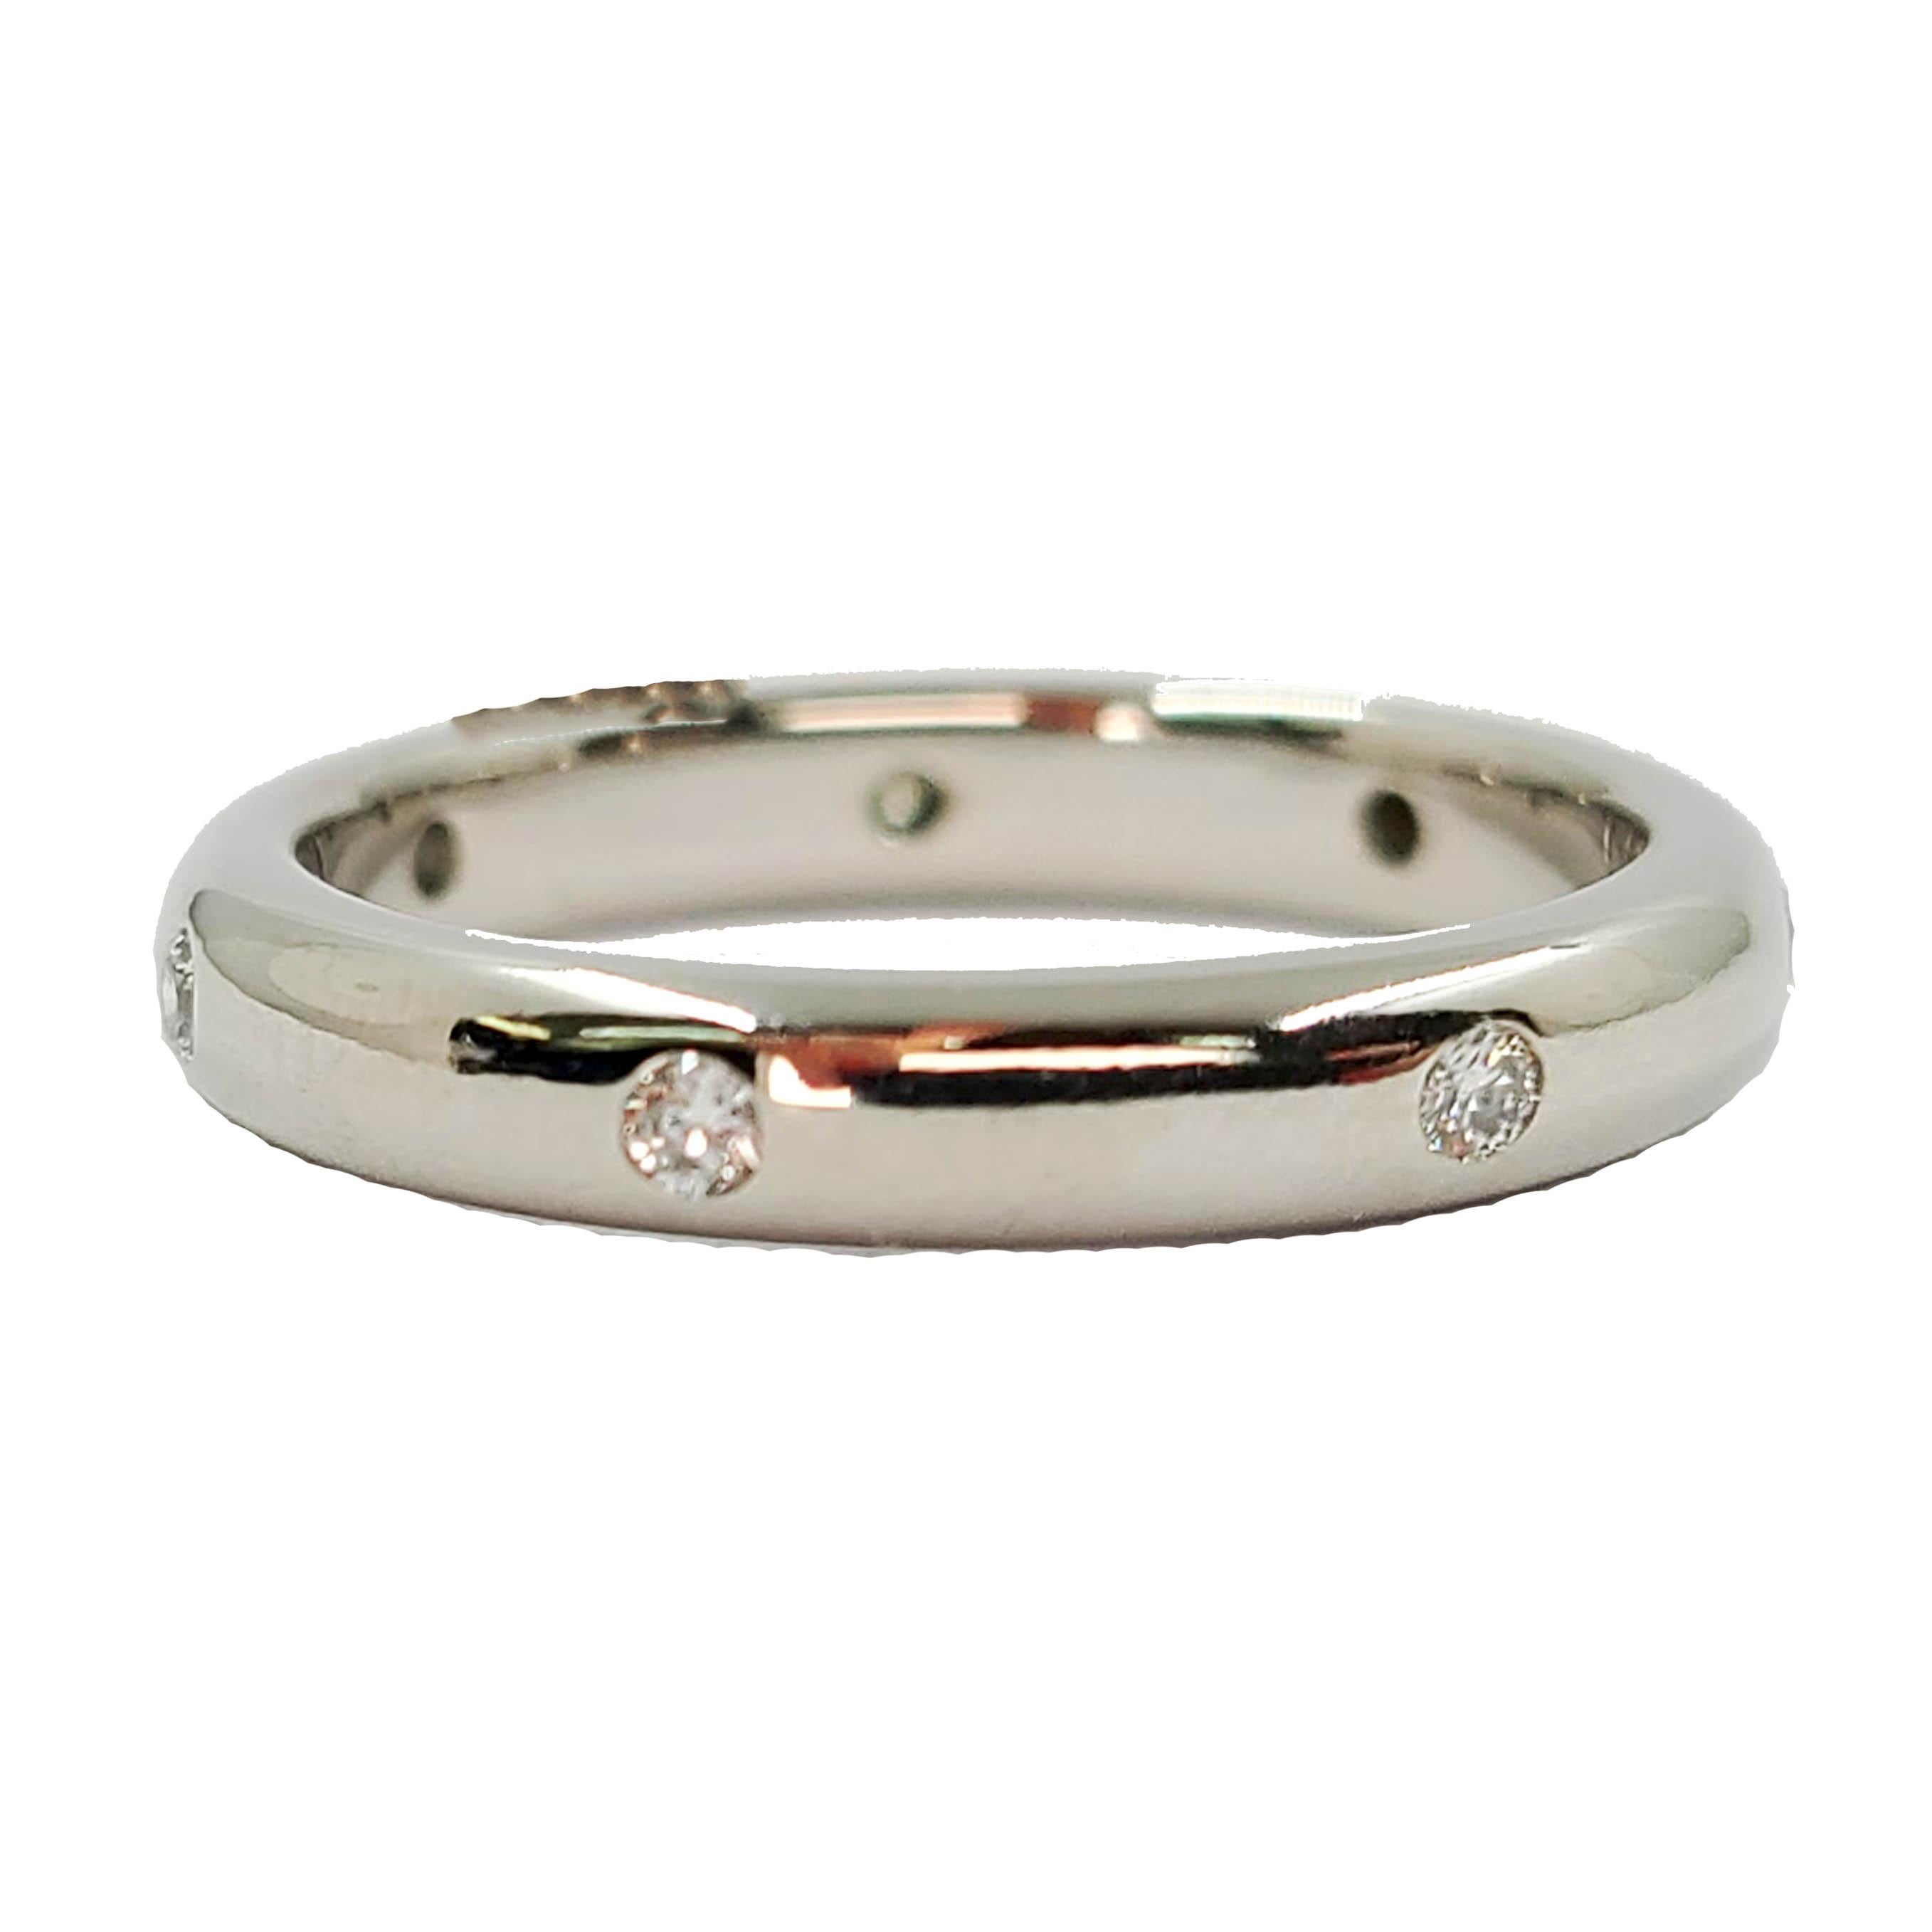 Platinum Diamond Band Featuring 7 Round Diamonds Totaling Approximately 0.10 Carat of VS Clarity & G Color That Extend Around Finger. Finished Weight is 5.9 Grams. Finger Size 5.75.